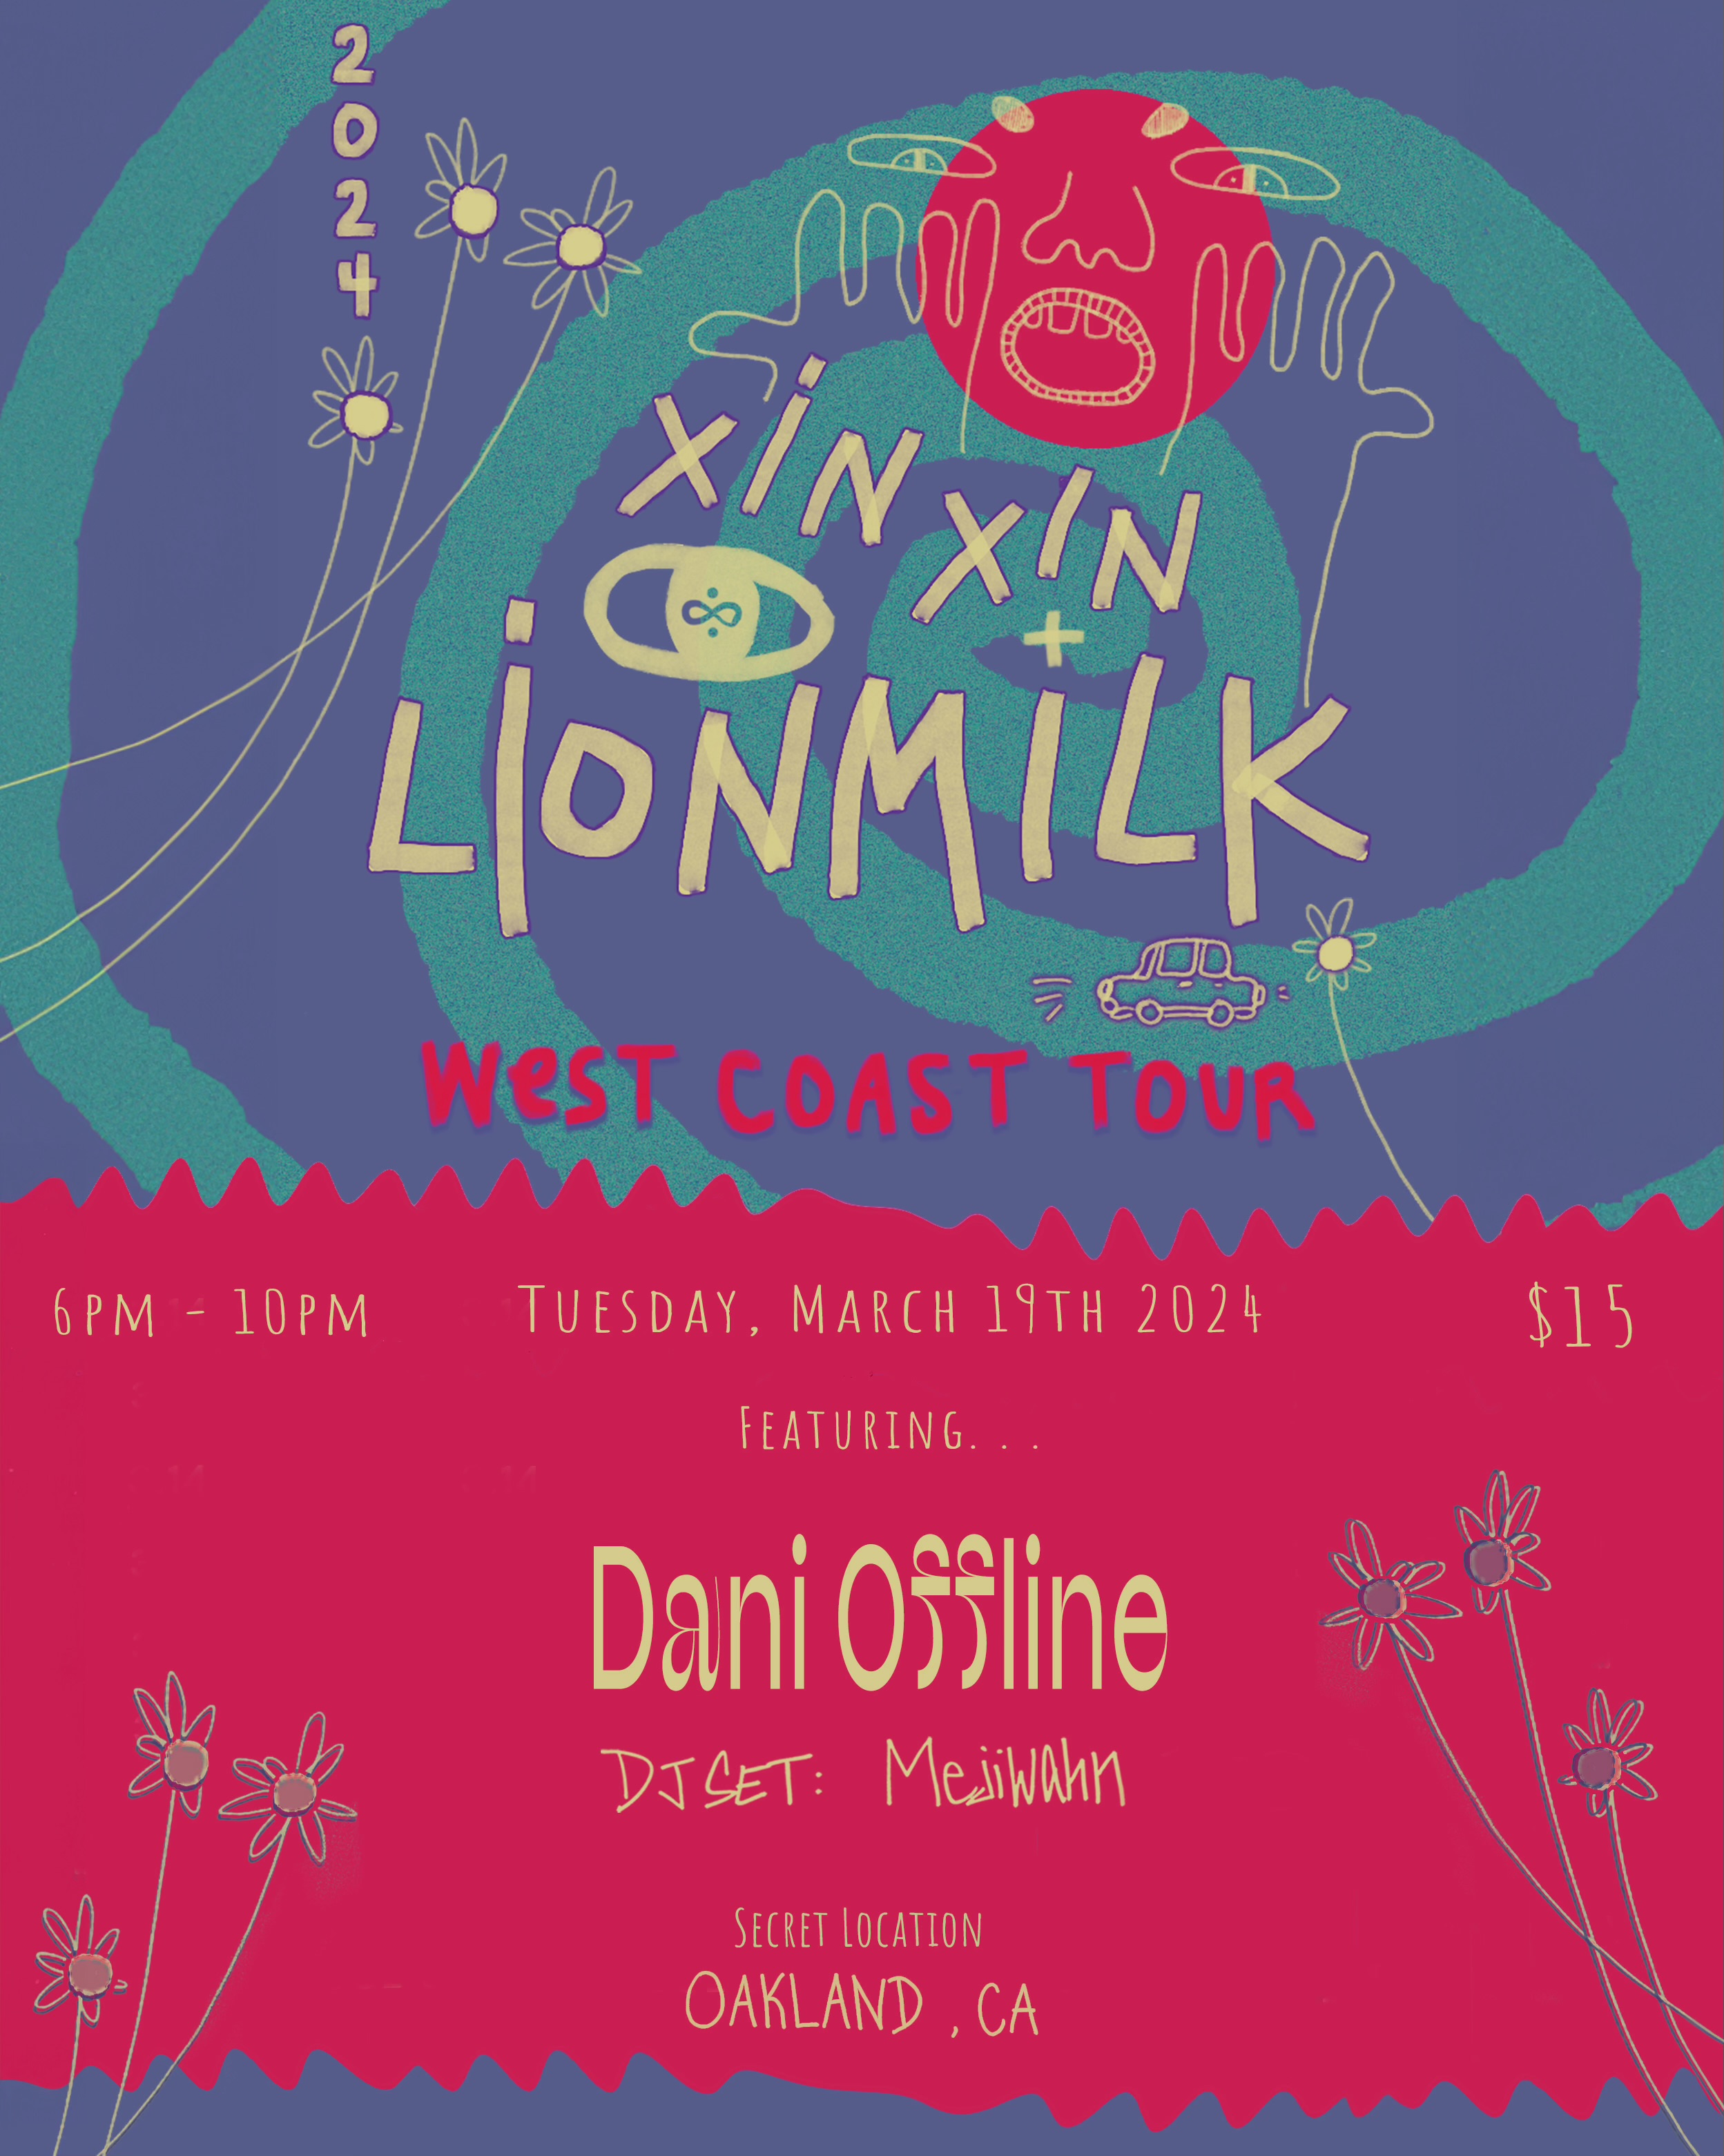 Show at Rhythm Retreat, opening for Lionmilk and Xinxin on their West Coast Tour